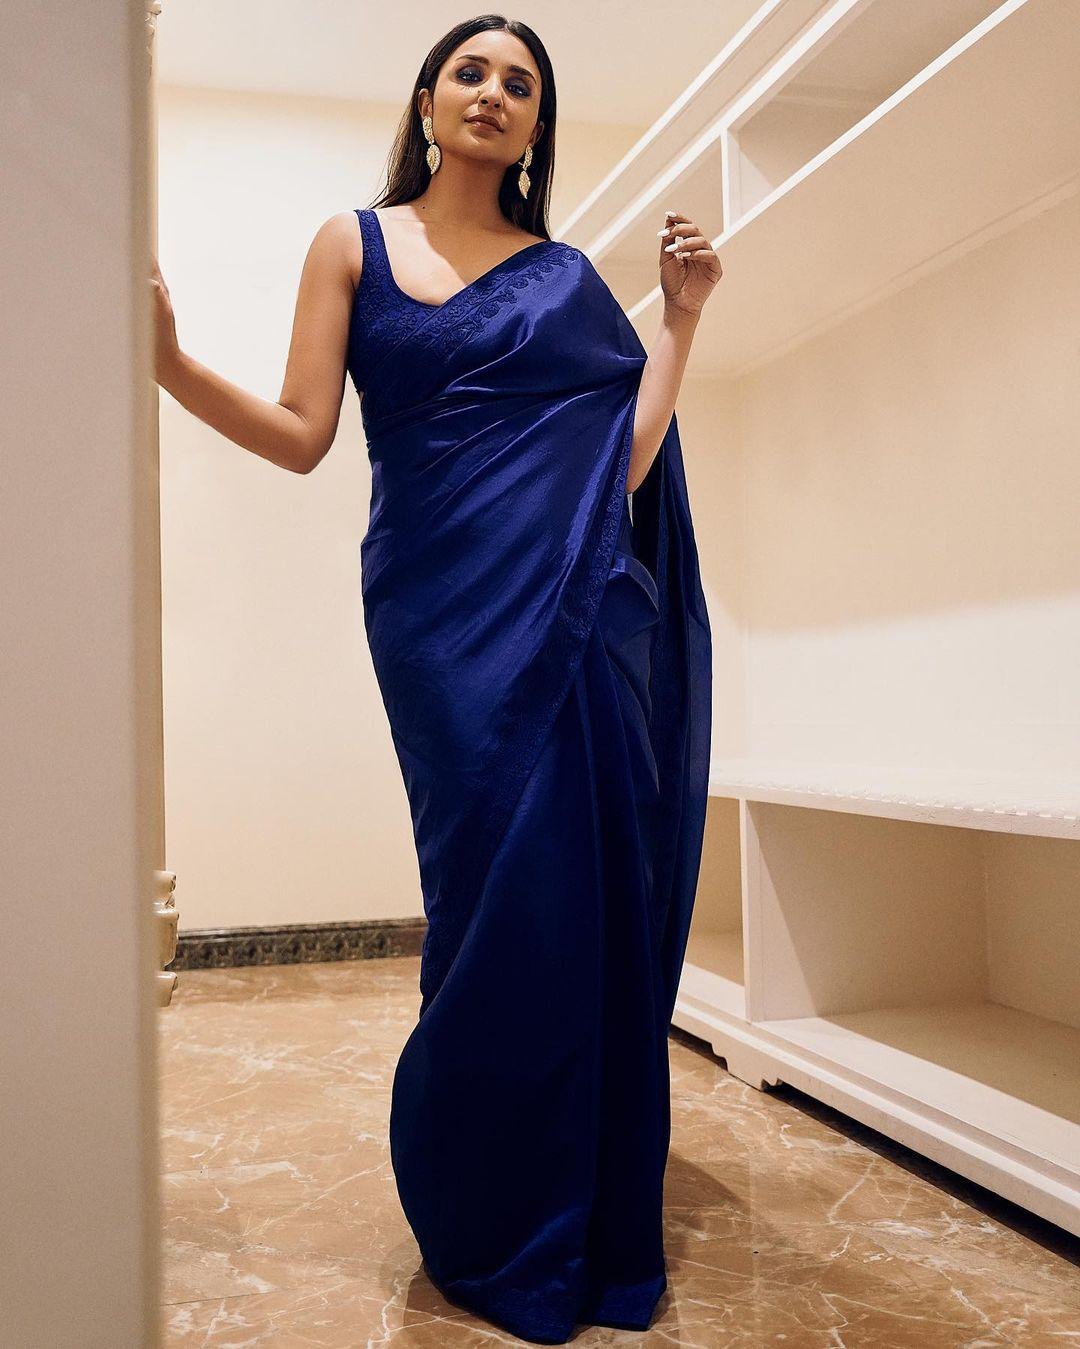 If you find yourself in the role of a bridesmaid, juggling numerous responsibilities for your best friend's wedding, a simple yet chic saree can be your perfect choice. Parineeti's elegant blue saree serves as an excellent option for a glamorous and sophisticated look 